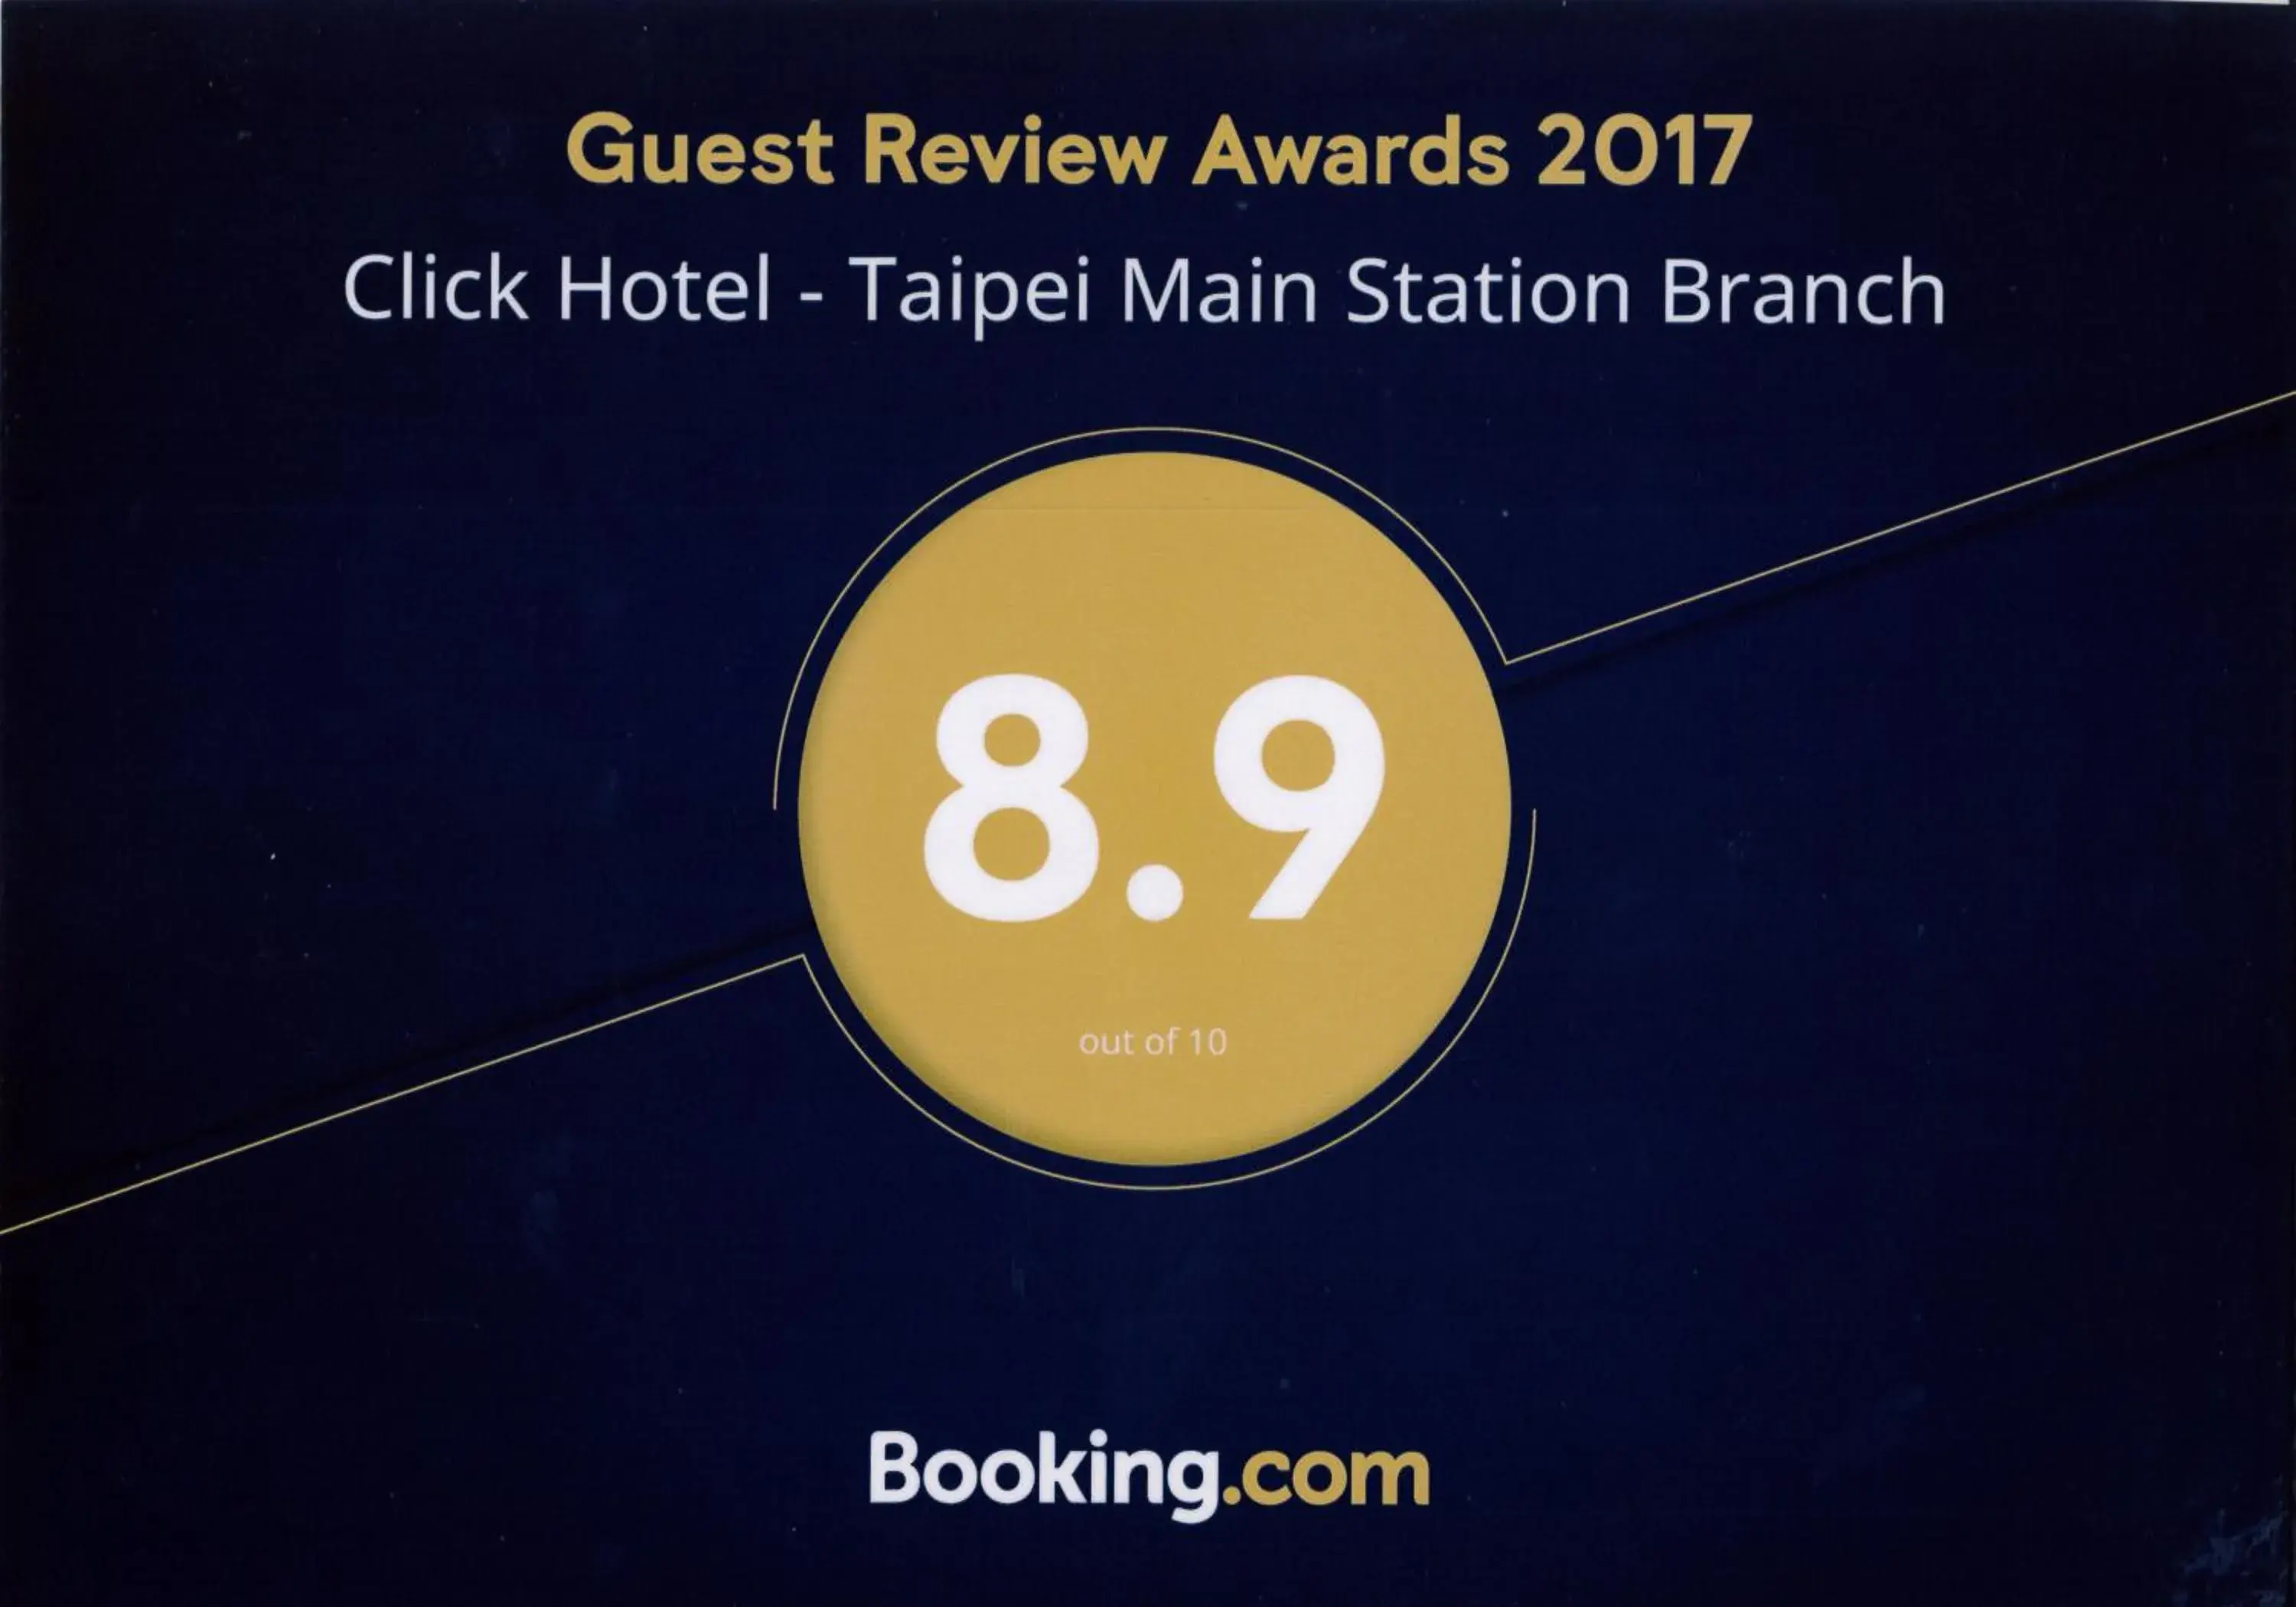 Certificate/Award in Click Hotel - Taipei Main station branch